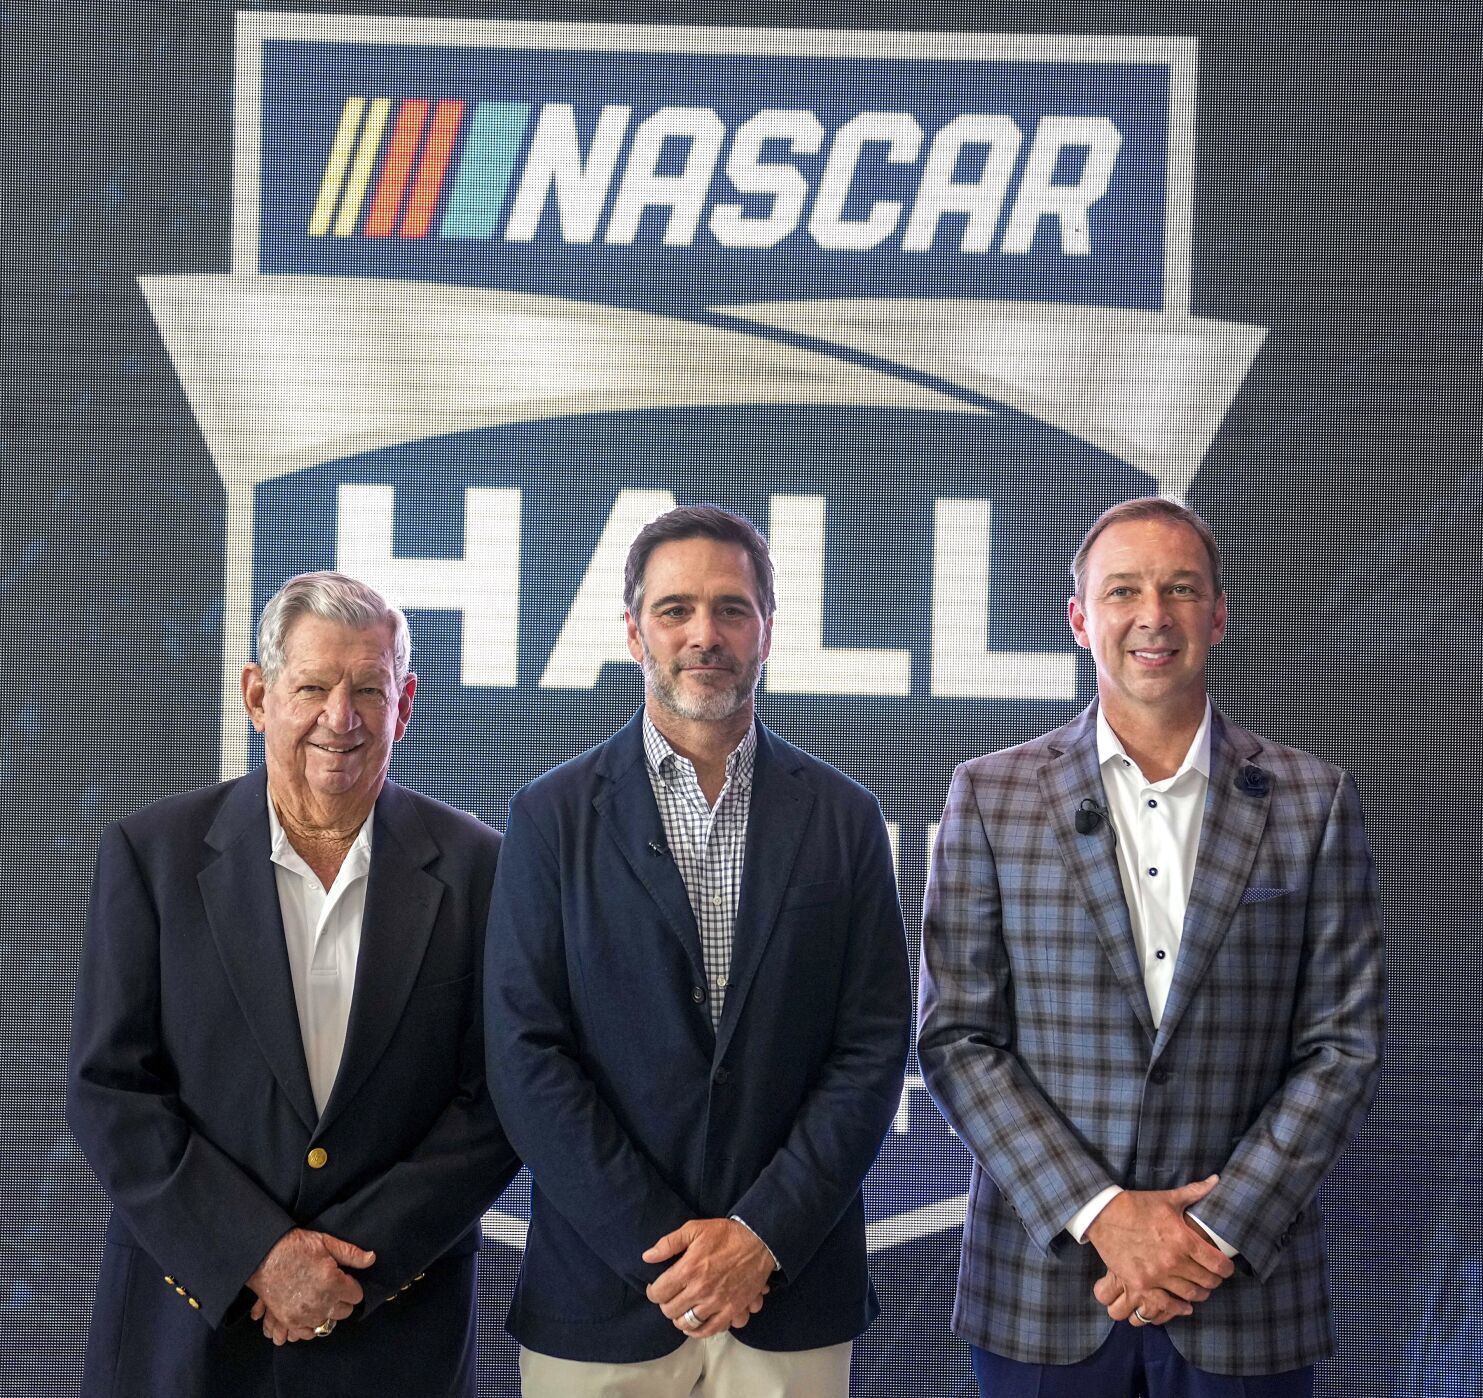 Jimmie Johnson, Chad Knaus join Donnie Allison as NASCAR Hall of Fame selections Sports mountaineagle